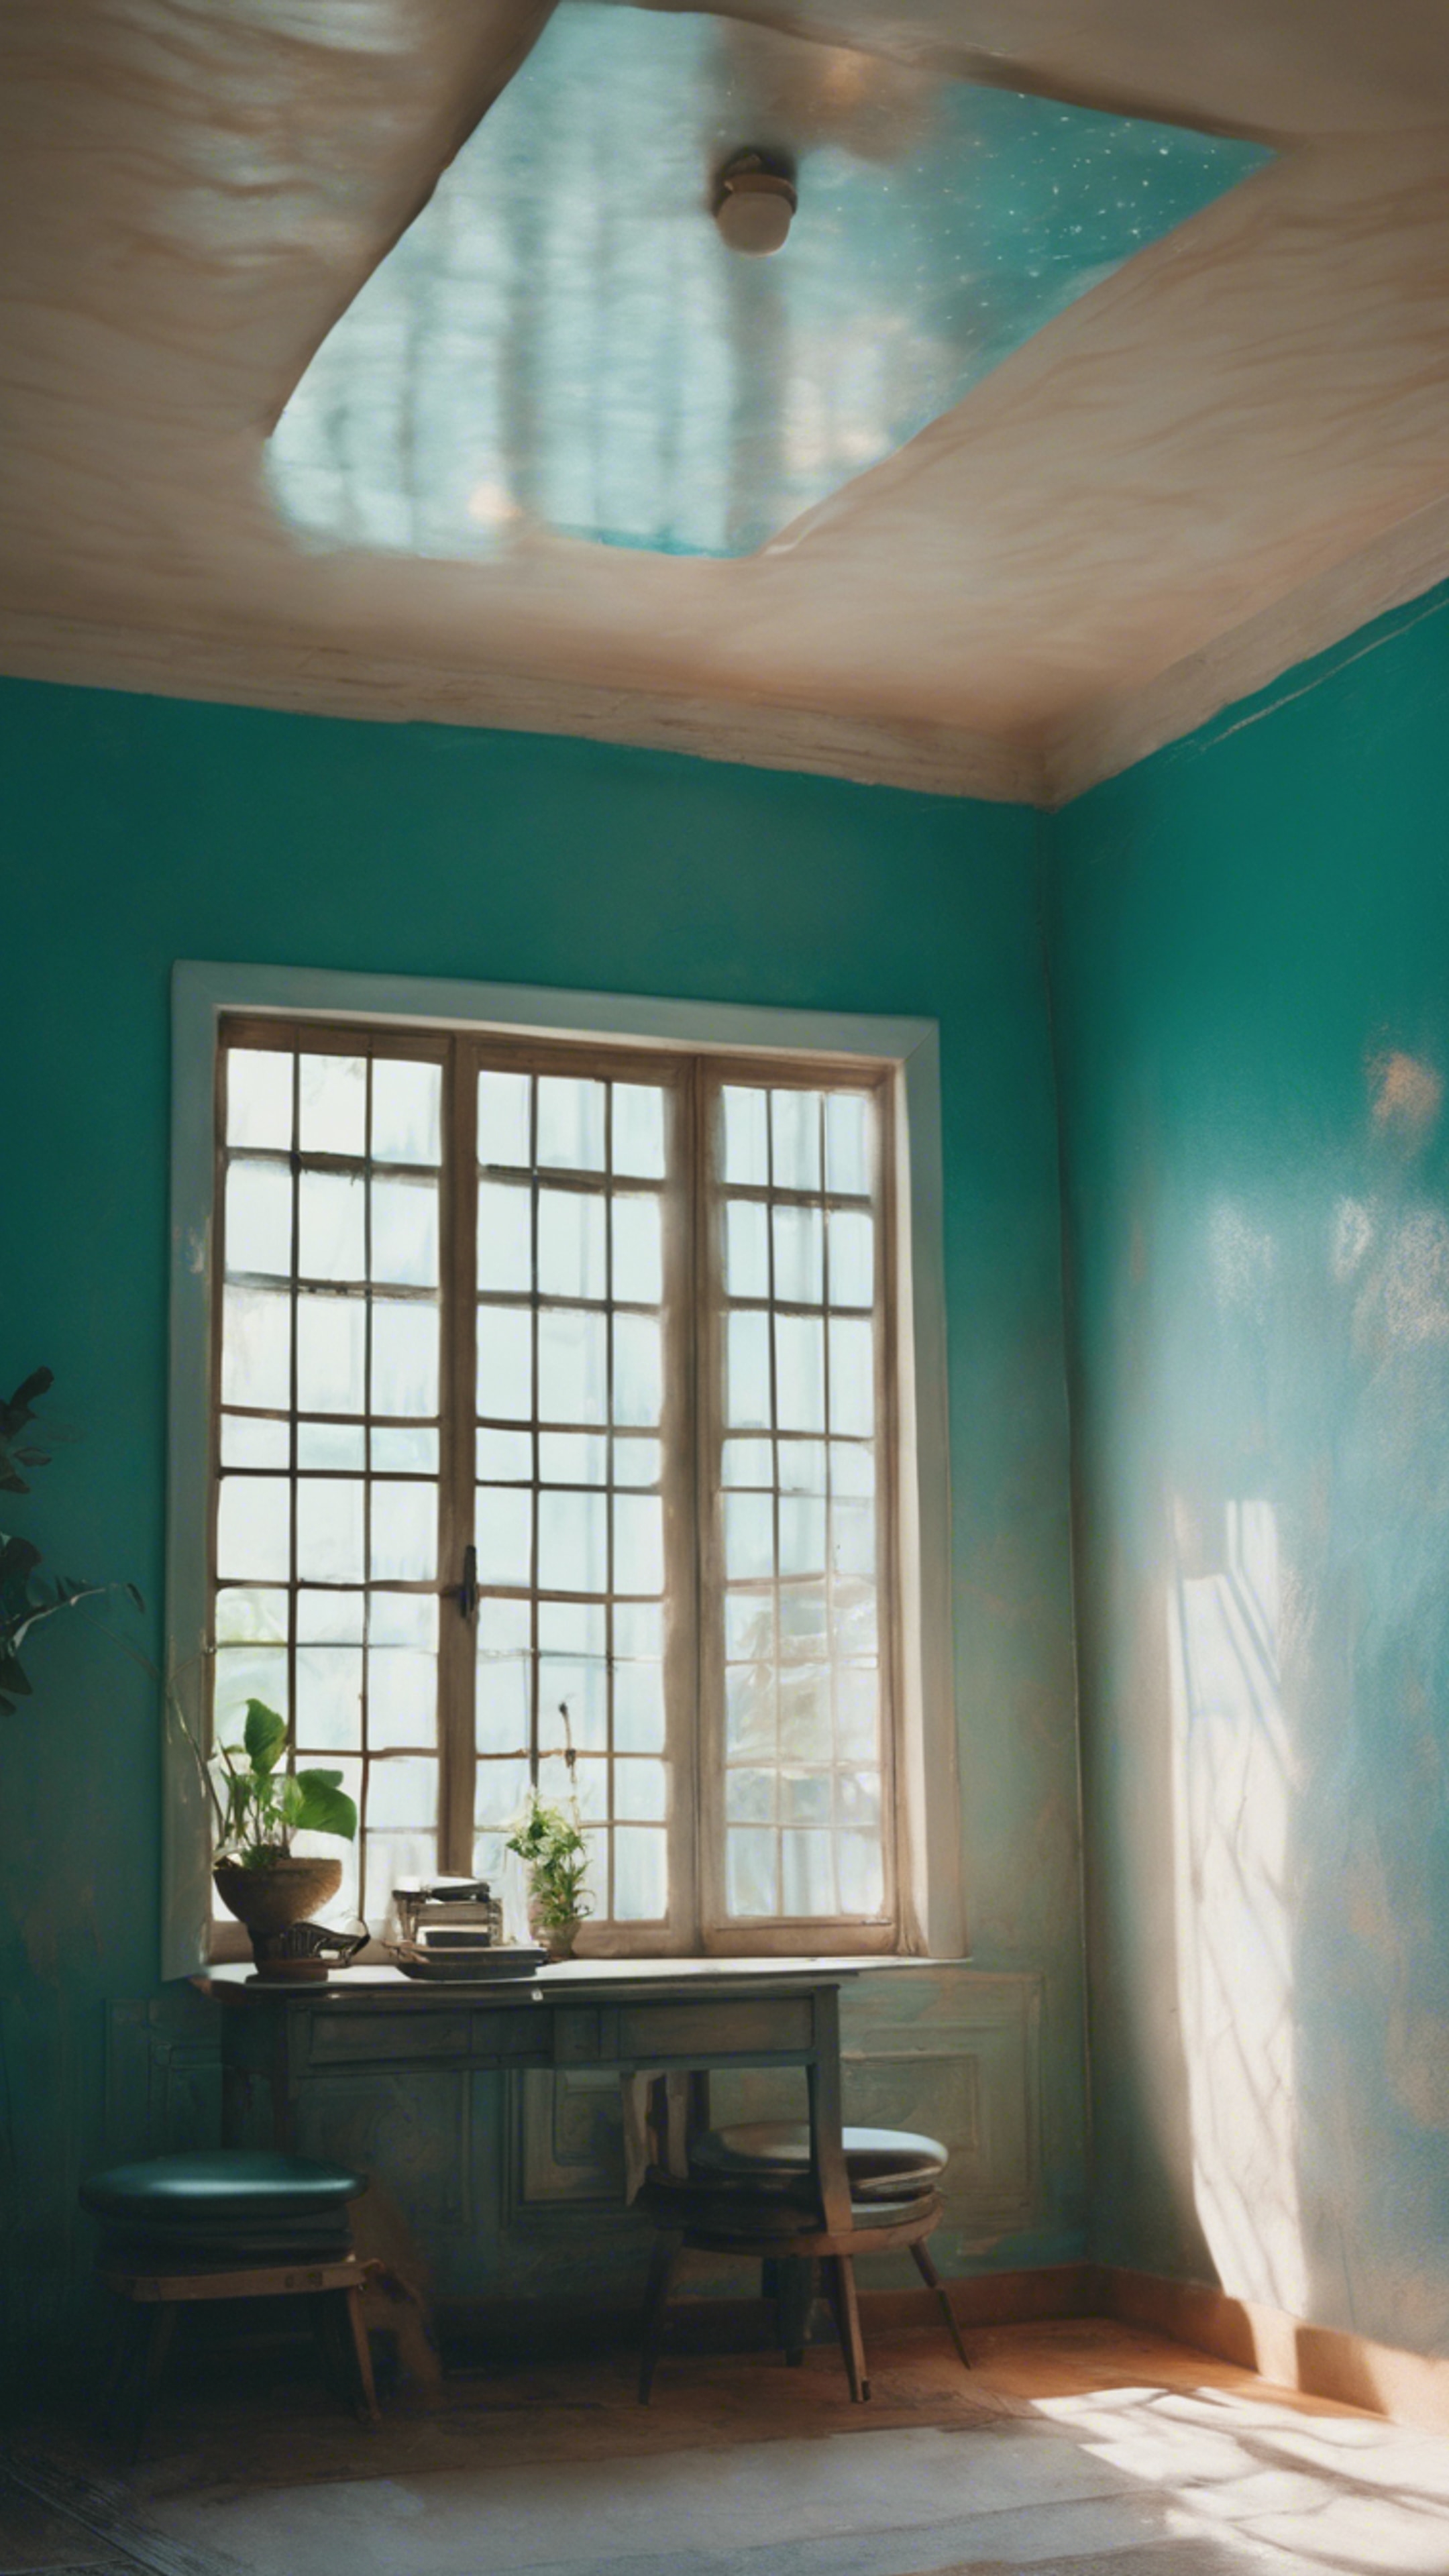 A serene room painted in the shade of cool teal. Wallpaper[59a2d2889aea4415a863]